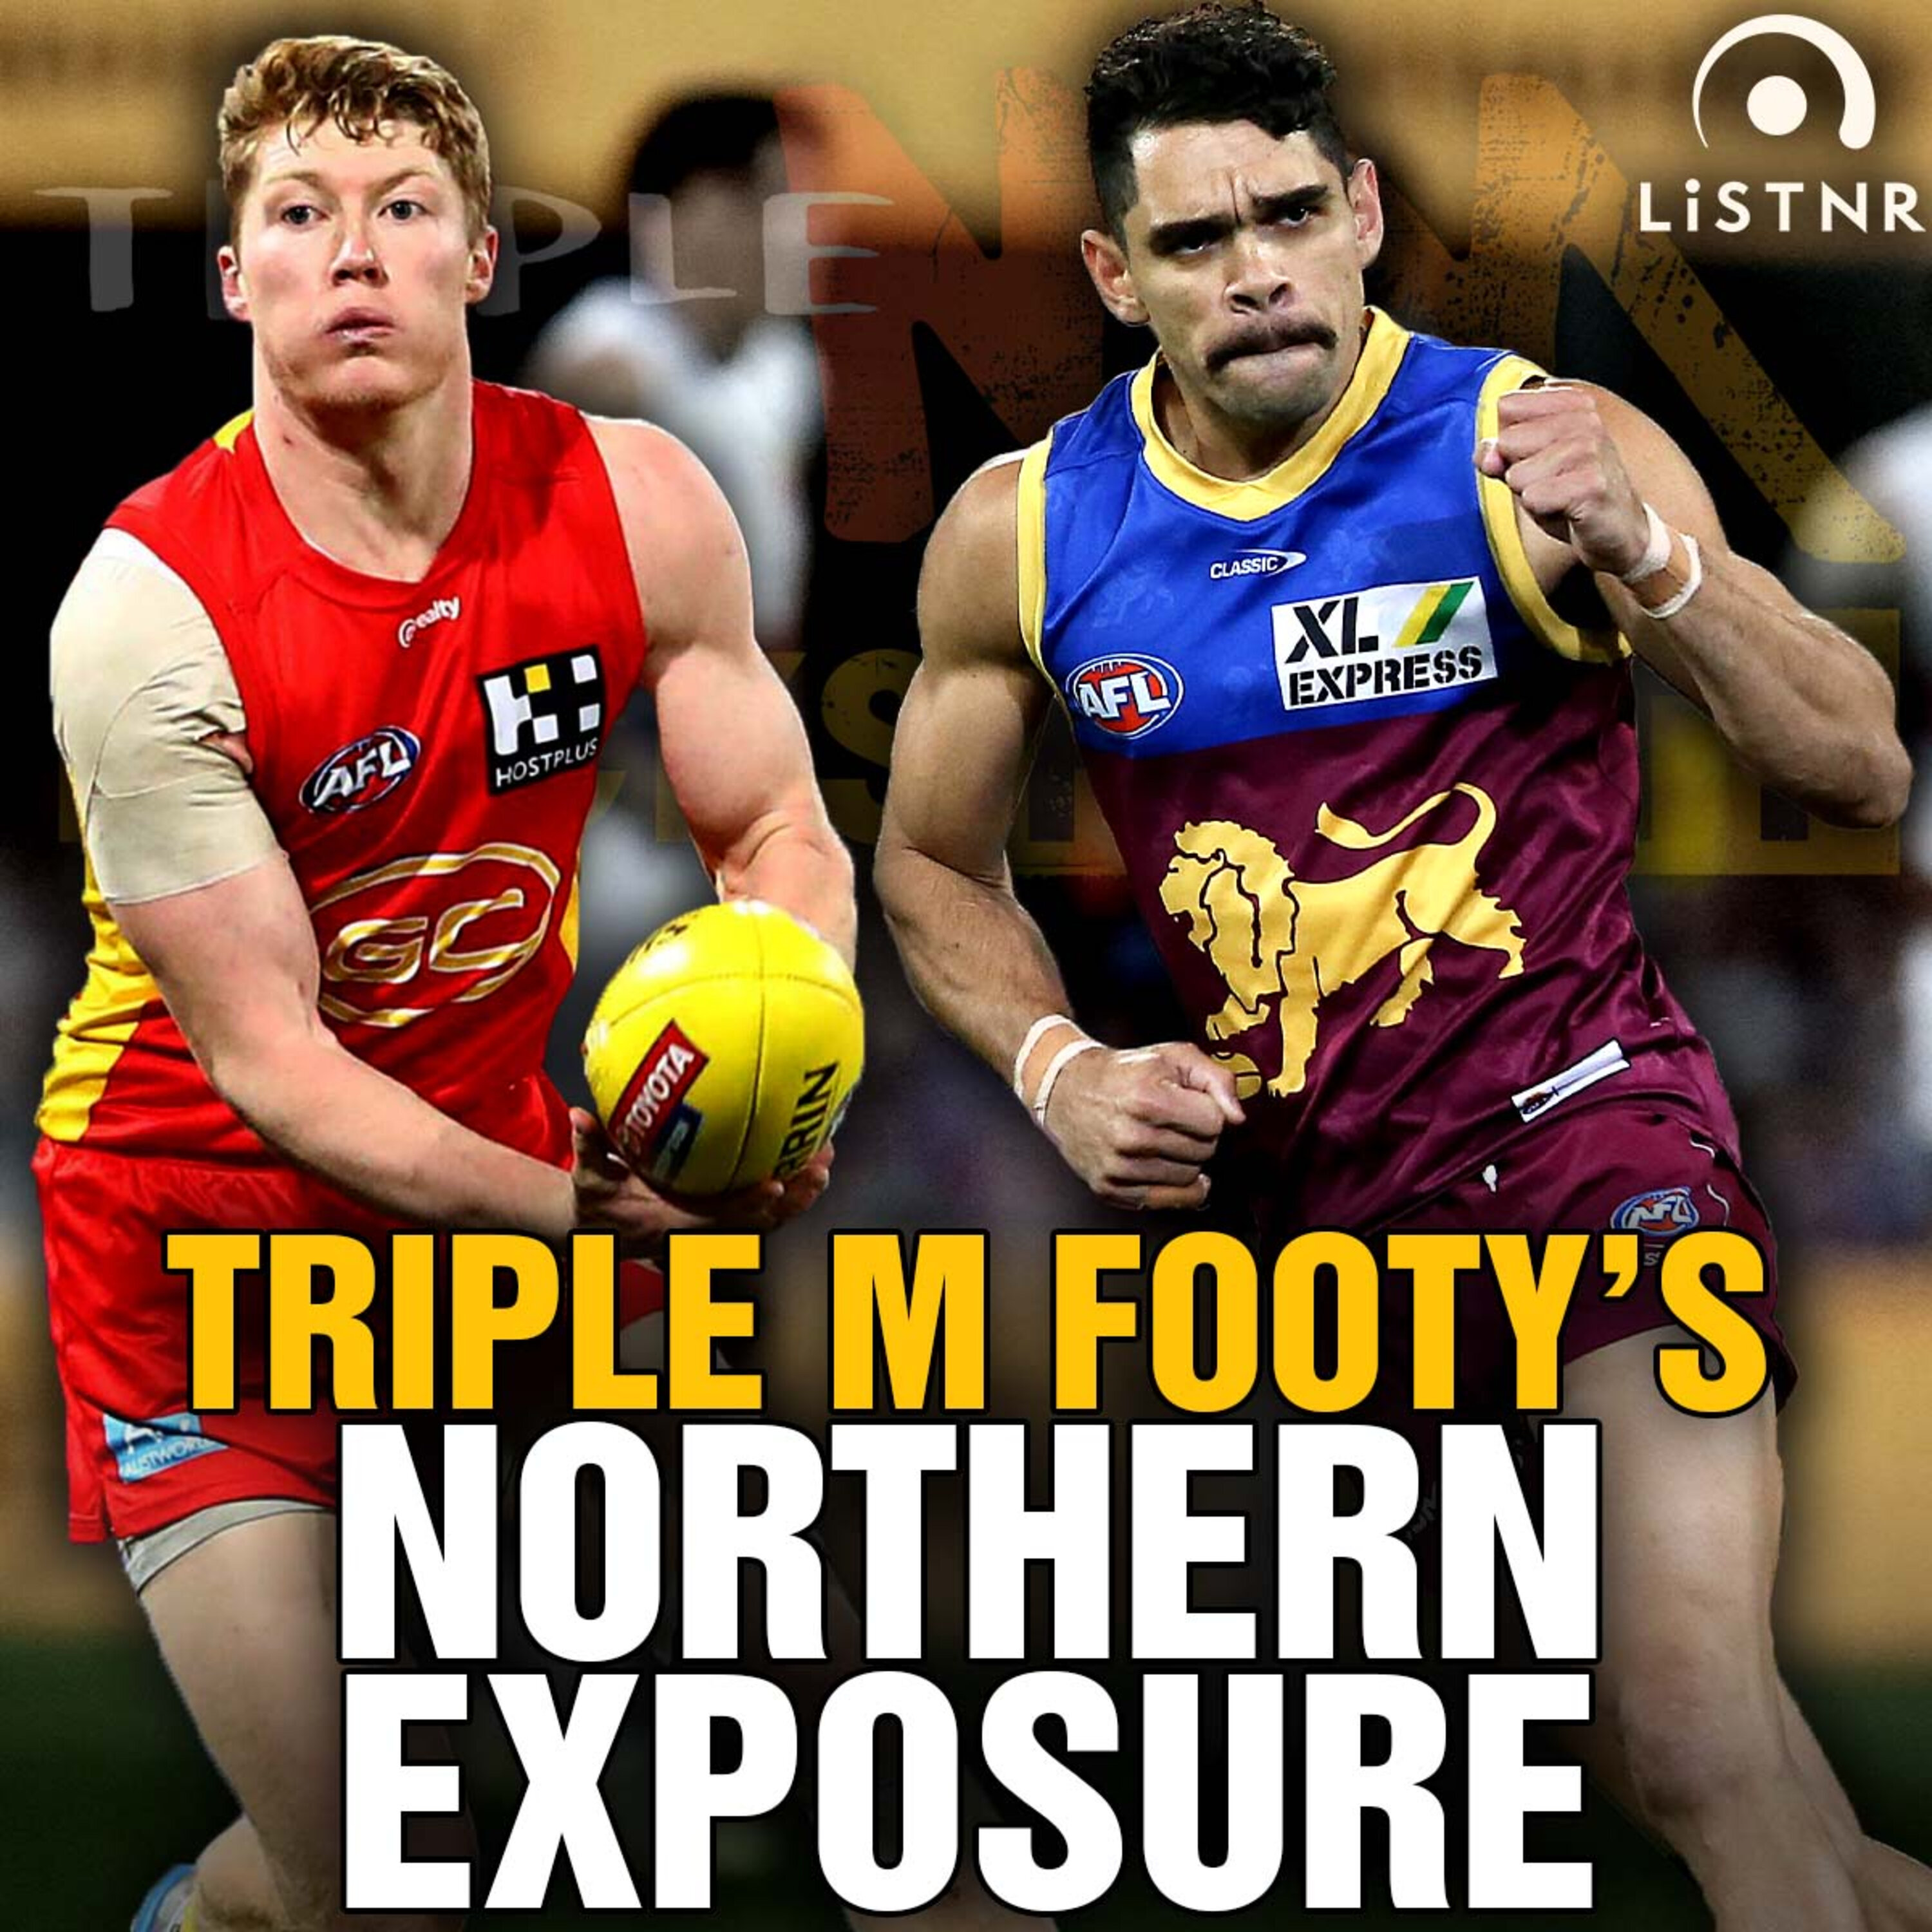 Northern Exposure | Sydney are Gold Coast's bunnies, Lions not out of first gear, Brisbane's key forward problems